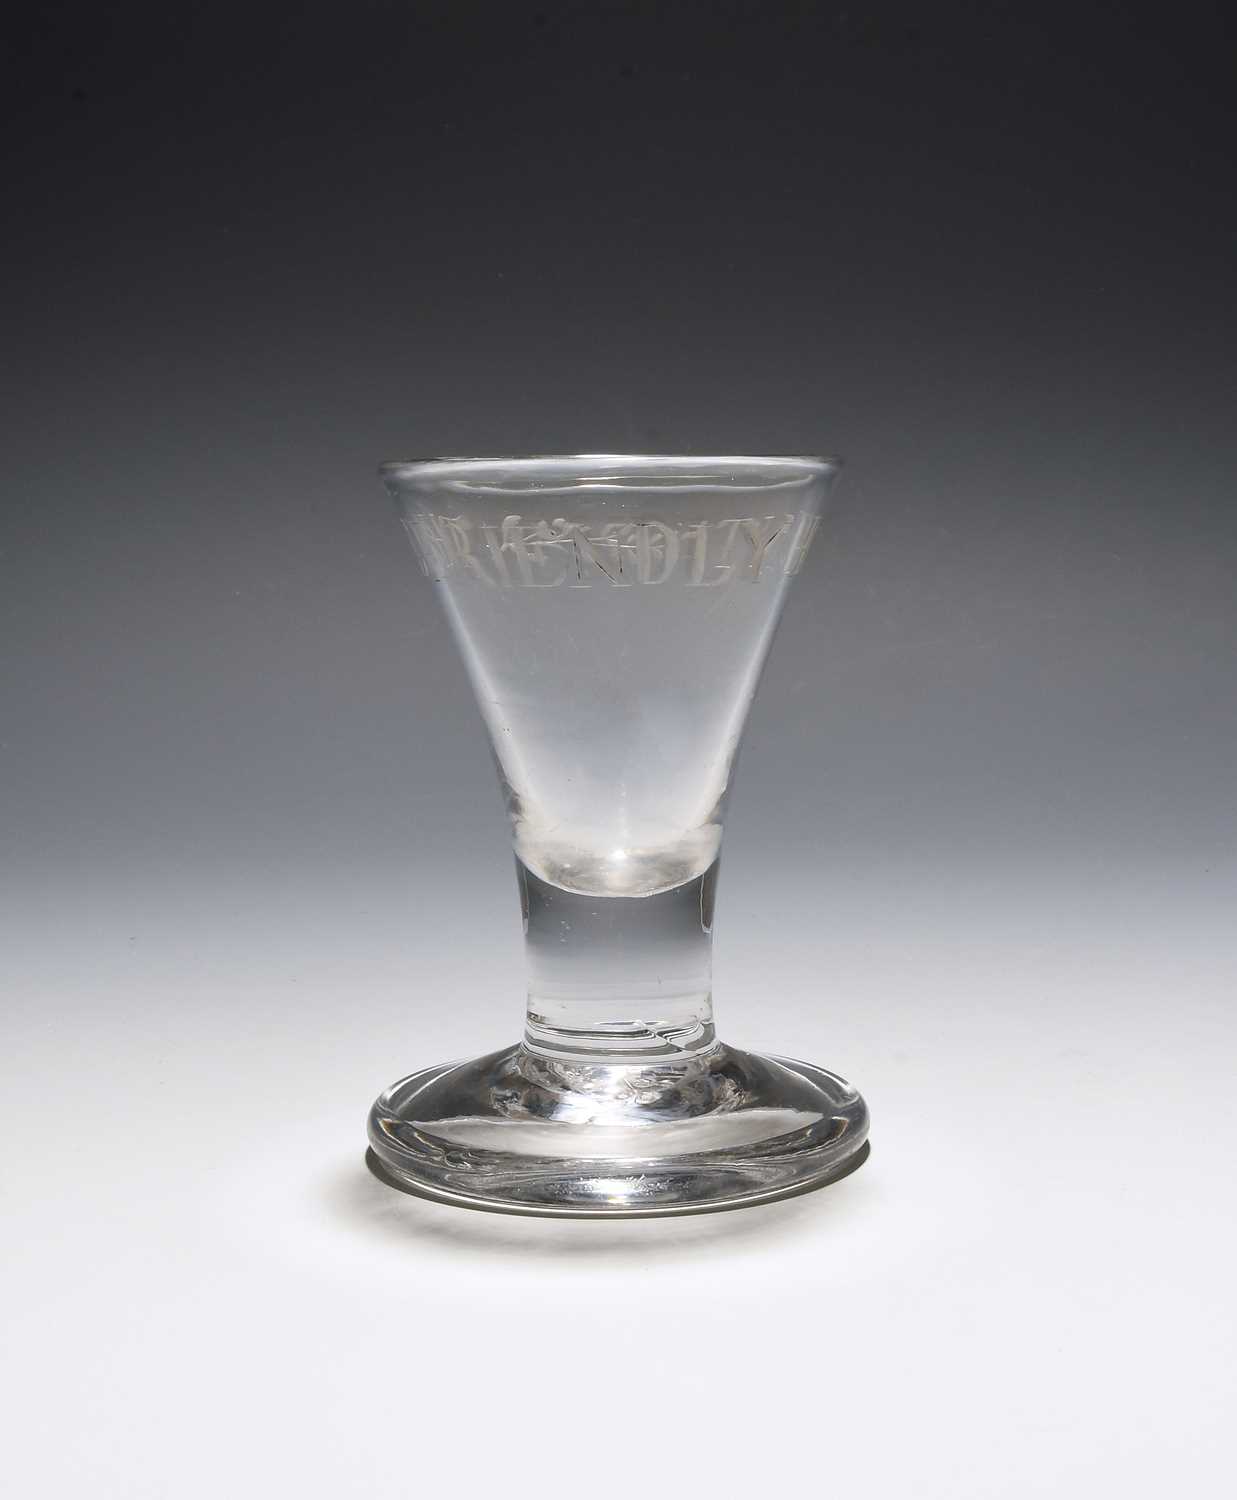 A 'Friendly Hunt' firing glass, c.1750, the drawn trumpet bowl engraved around the rim with 'The